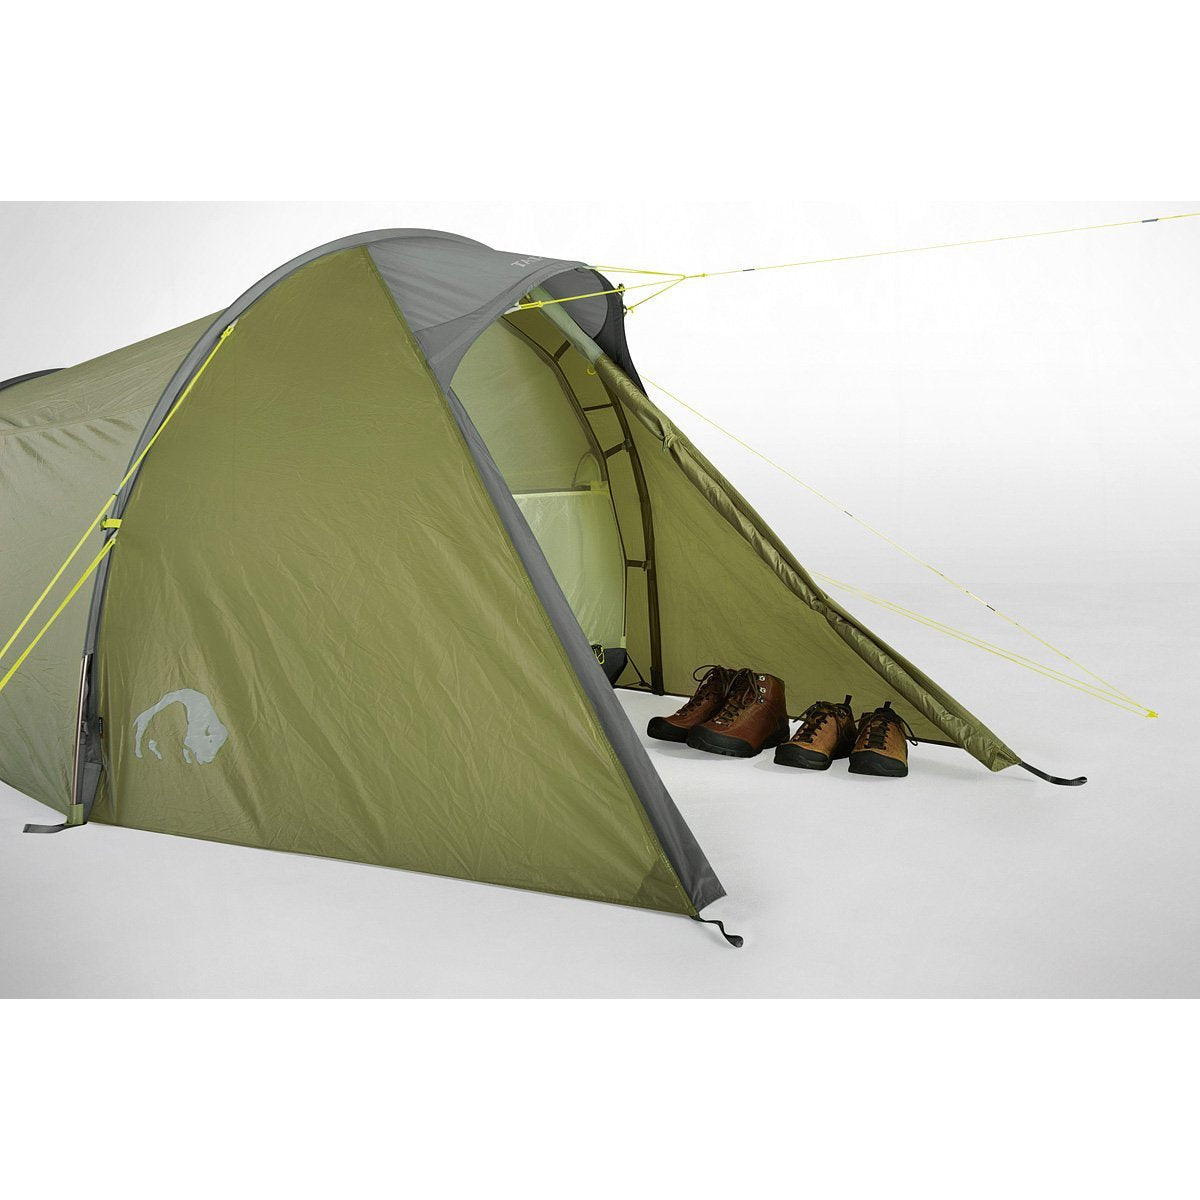 Tatonka Narvik 3 Light Olive 3 Persons Tent Outdoor and Survival Products Tatonka Tactical Gear Supplier Tactical Distributors Australia